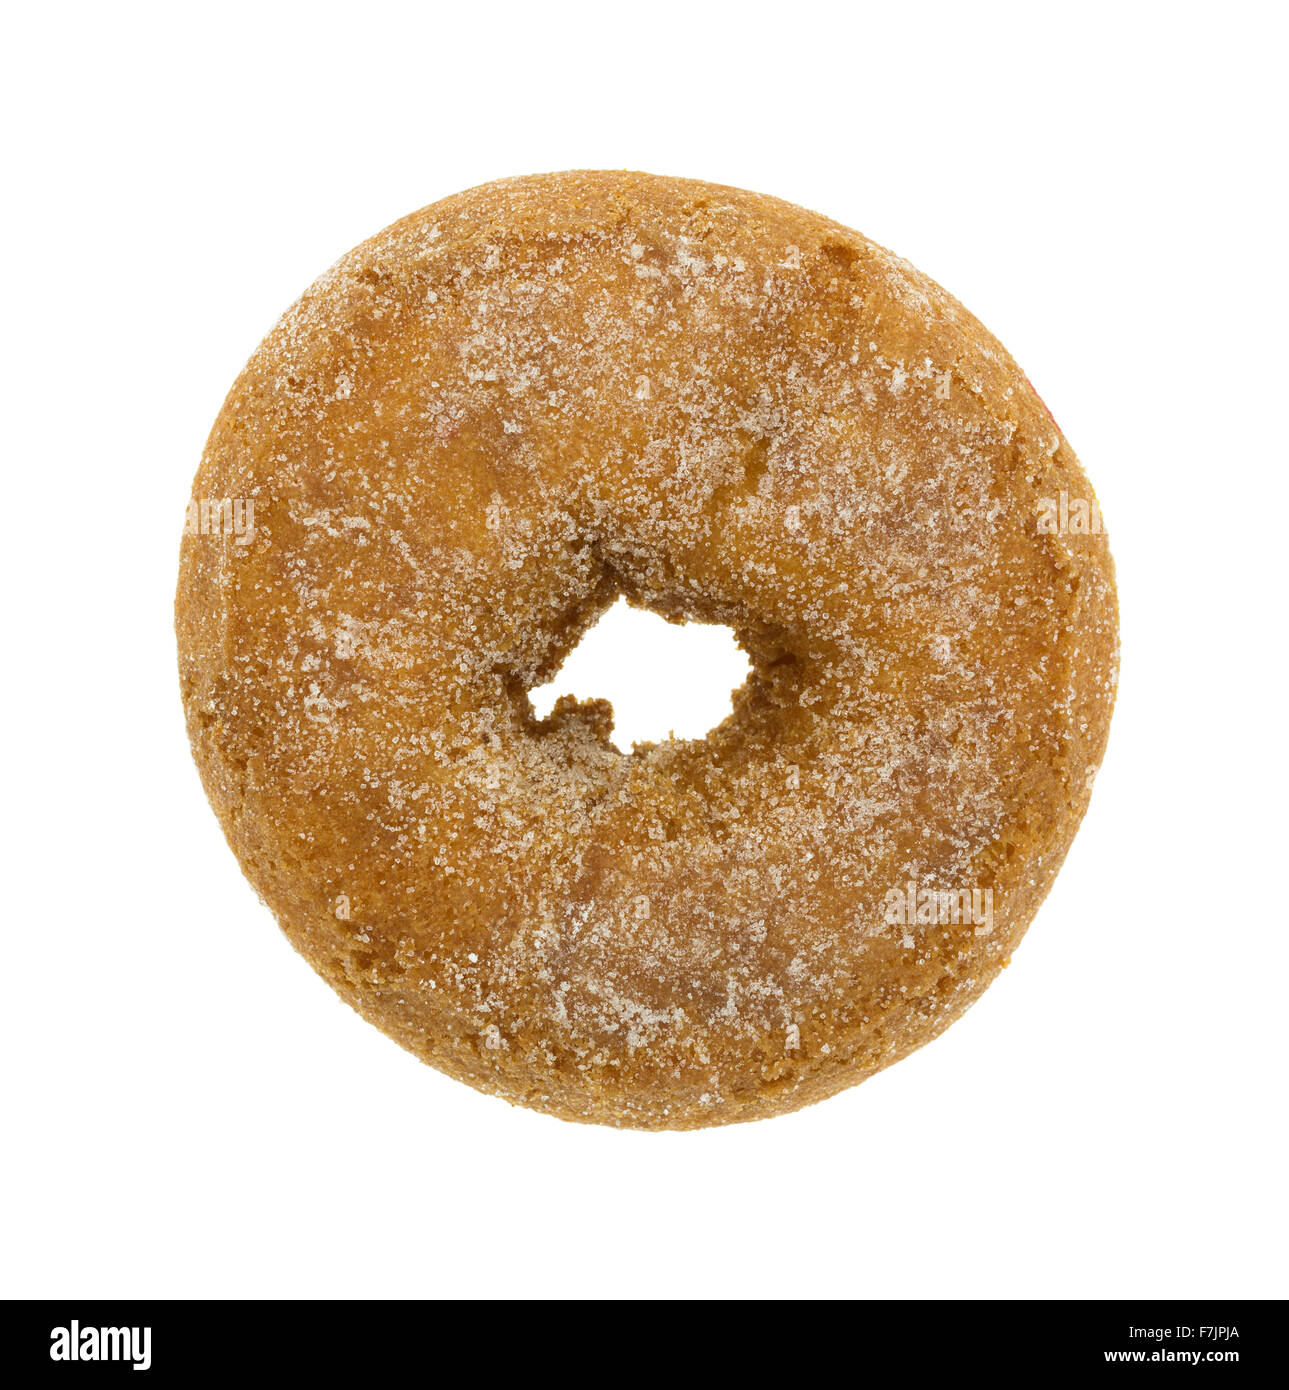 Top view of a generic plain cake donut with sugar granules isolated on a white background. Stock Photo